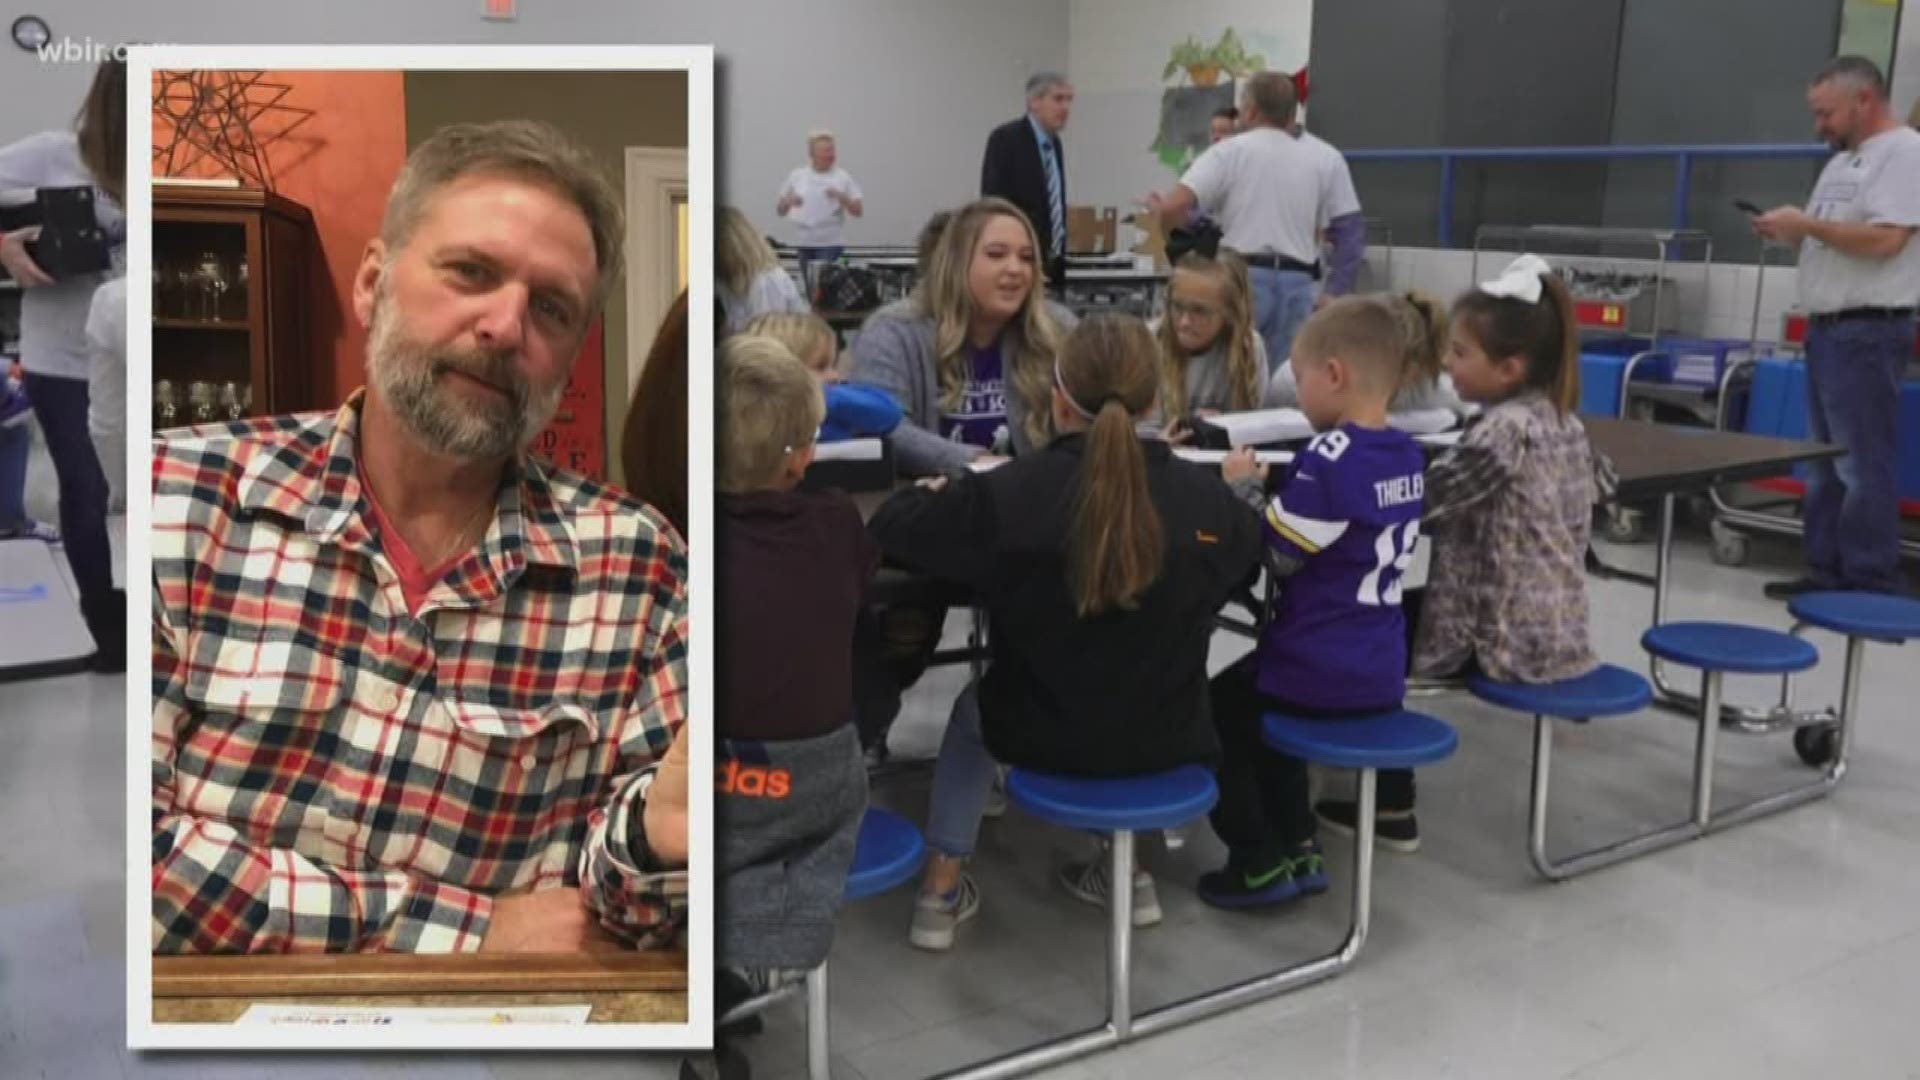 Alan Taylor's dying was was to  make sure students in Kingston & Kenya receive a new pair of shoes. Today, his loved ones made that dream come true. Nov. 4, 2019